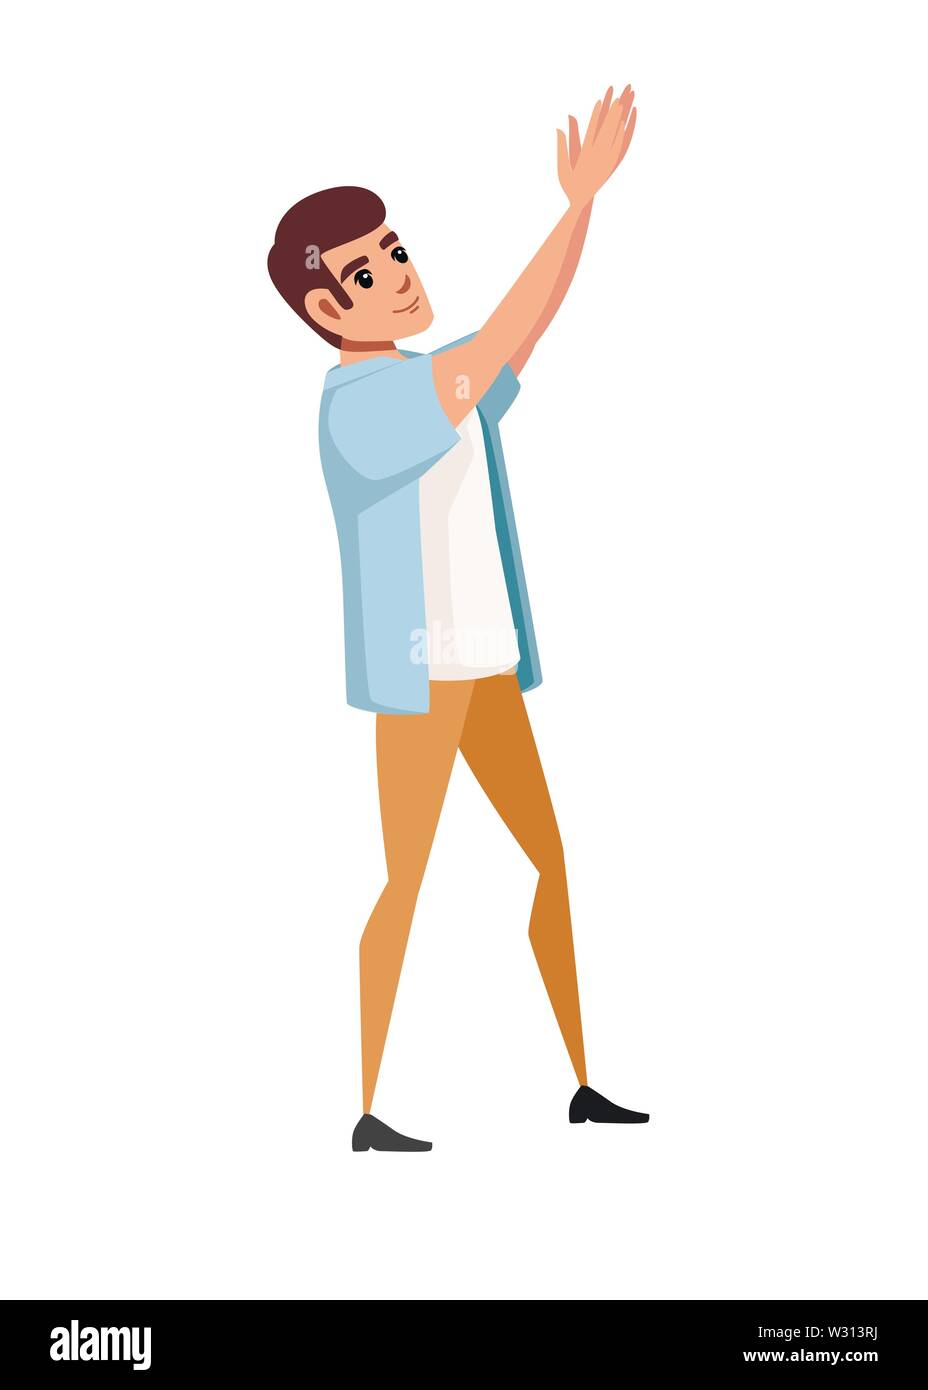 Man wearing casual clothes with upraised hands claps cartoon character design flat vector illustration isolated on white background. Stock Vector